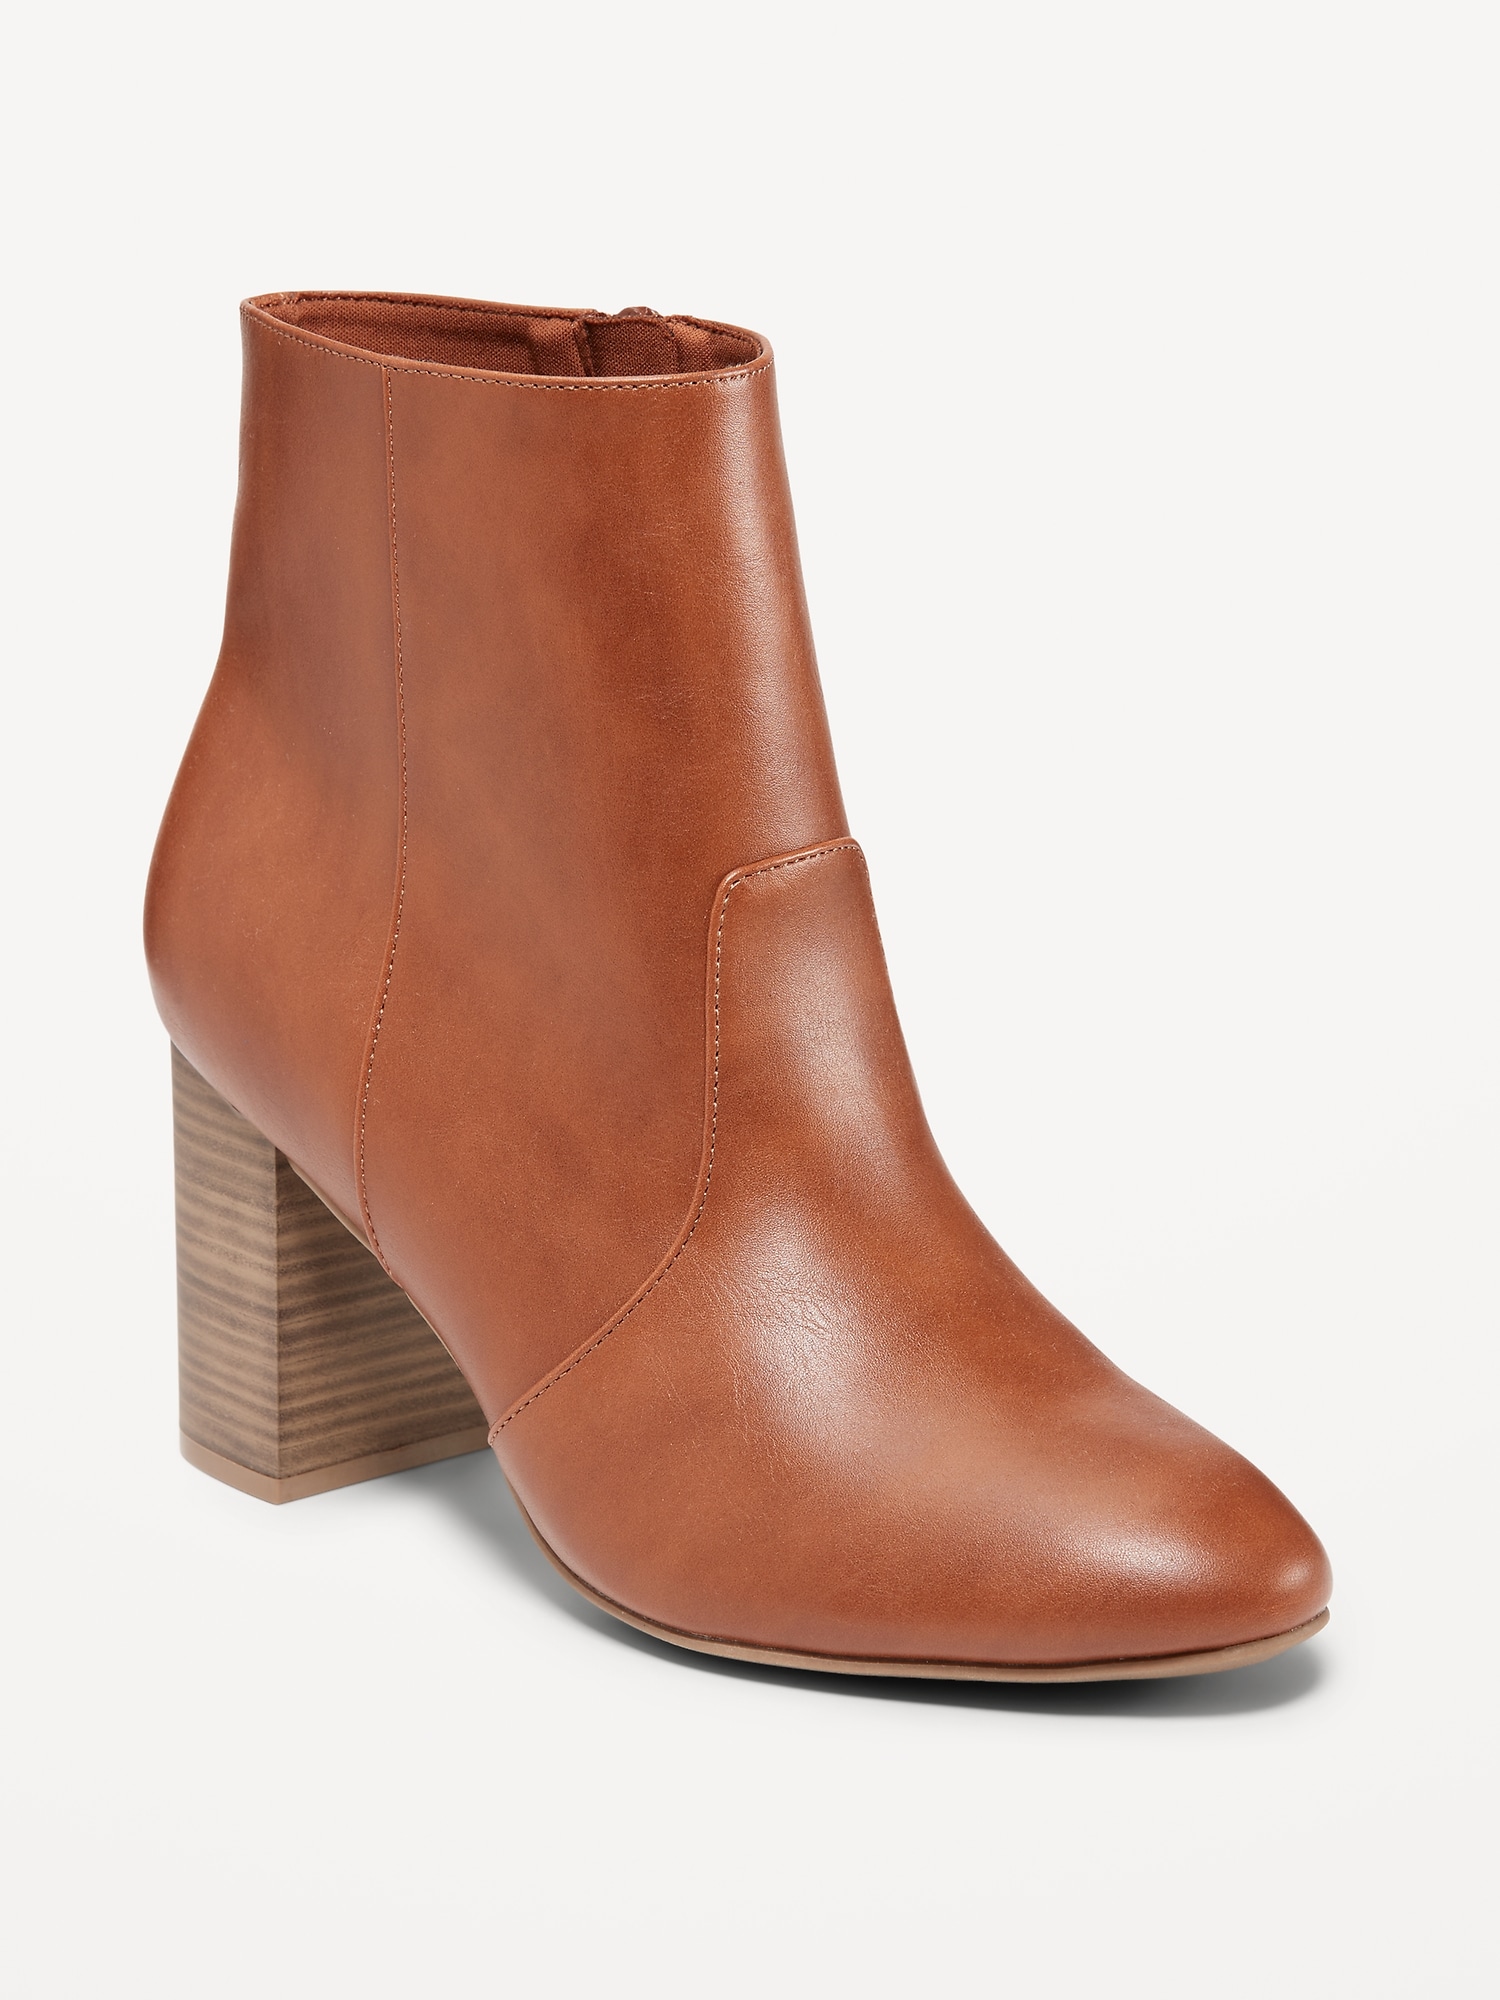 Zara High Leg Leather Heeled Boots | Heeled boots, Leather high heel boots,  Fall shoe trend